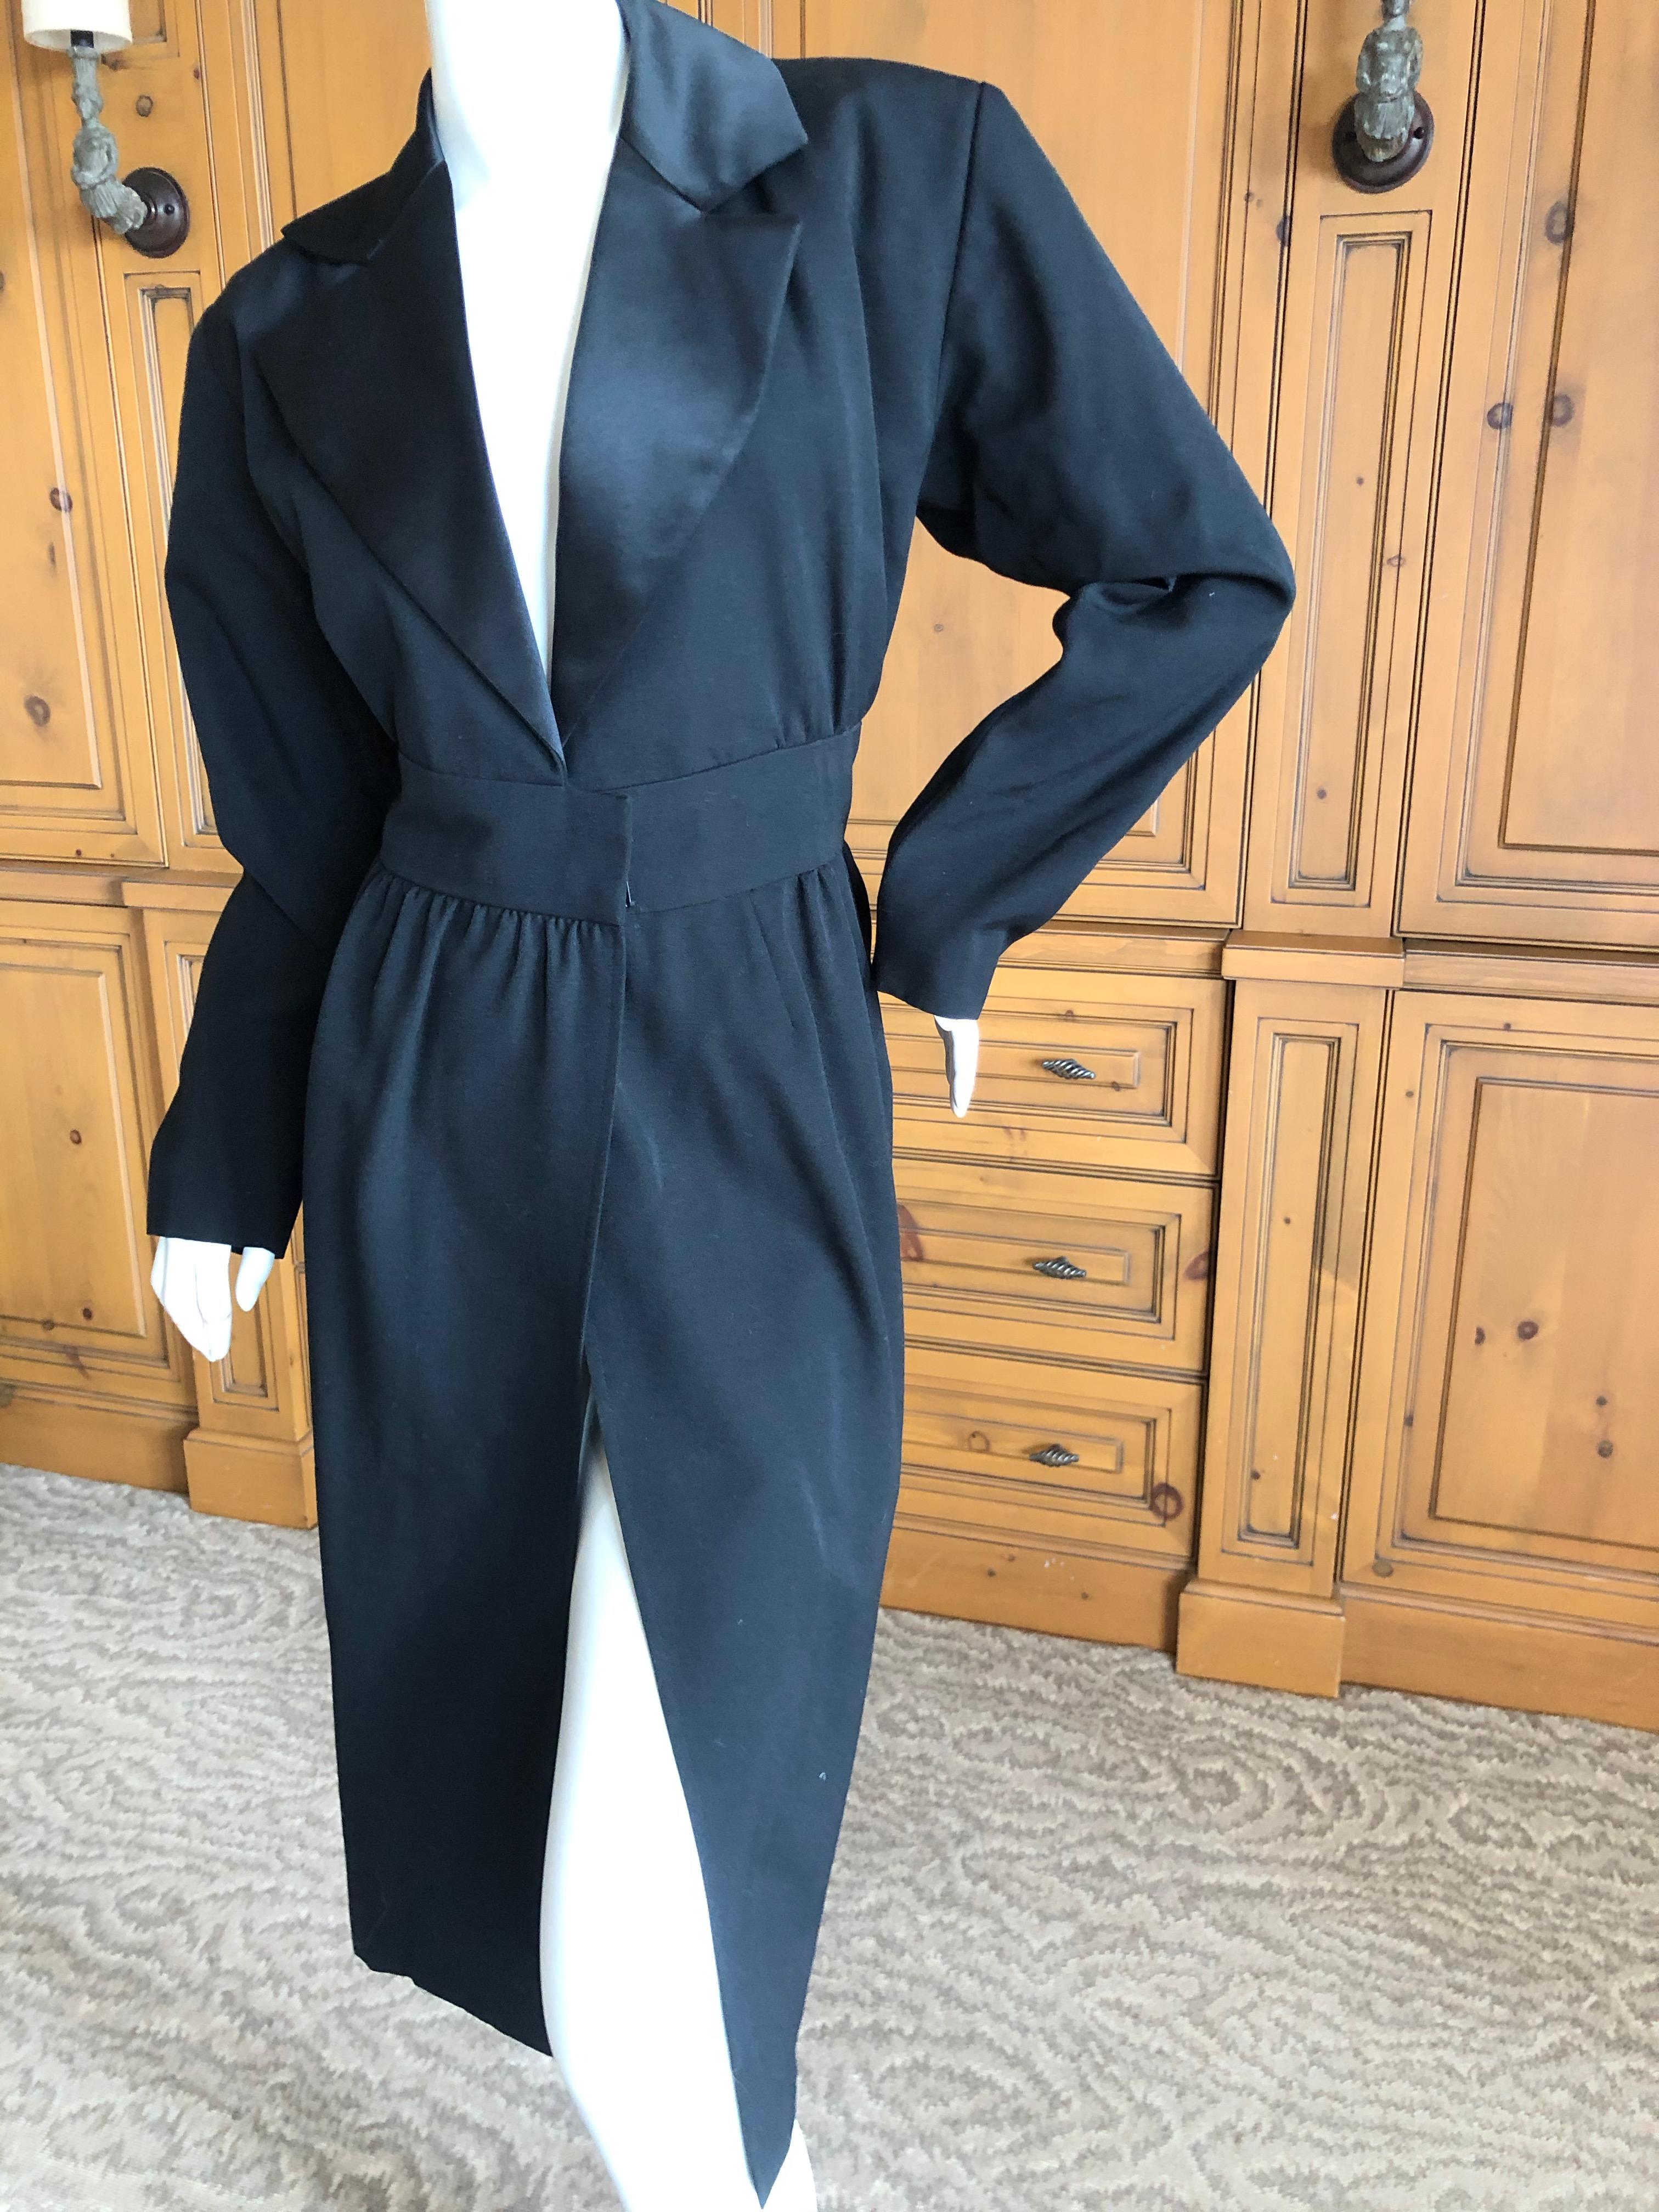 Yves Saint Laurent Rive Gauche Vintage 80's Le Smoking Satin Lapel Tuxedo Wrap Dress
 Size 36, this runs VERY large for this size, I would estimate it size 42 (8-10)
It is a wrap style dress  with very strong shoulders.
Bust 42